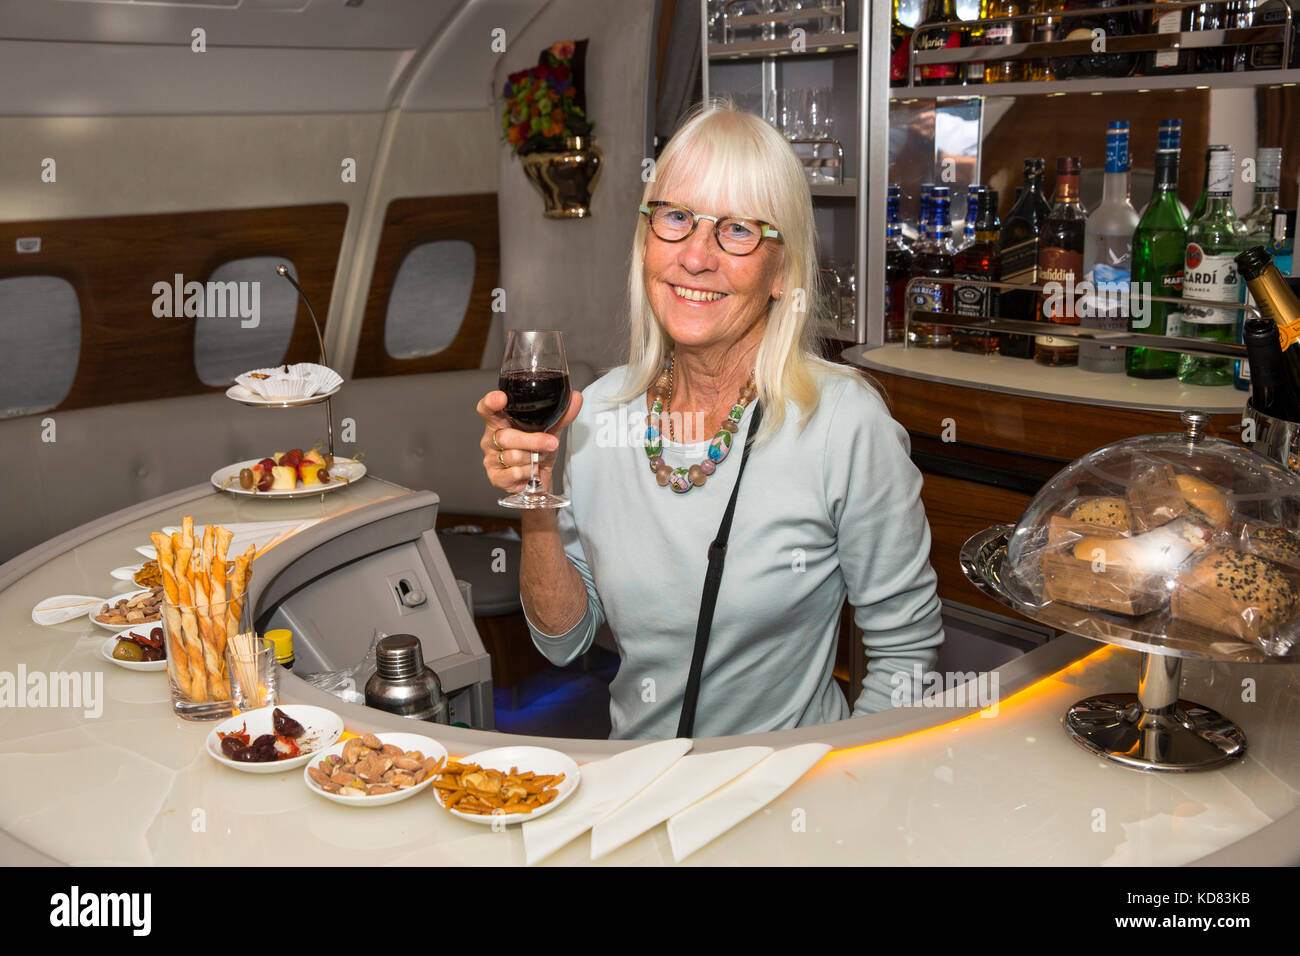 Air Travel Emirates Airbus A380 aircraft, tourist with drink behind Business Class cabin bar Stock Photo